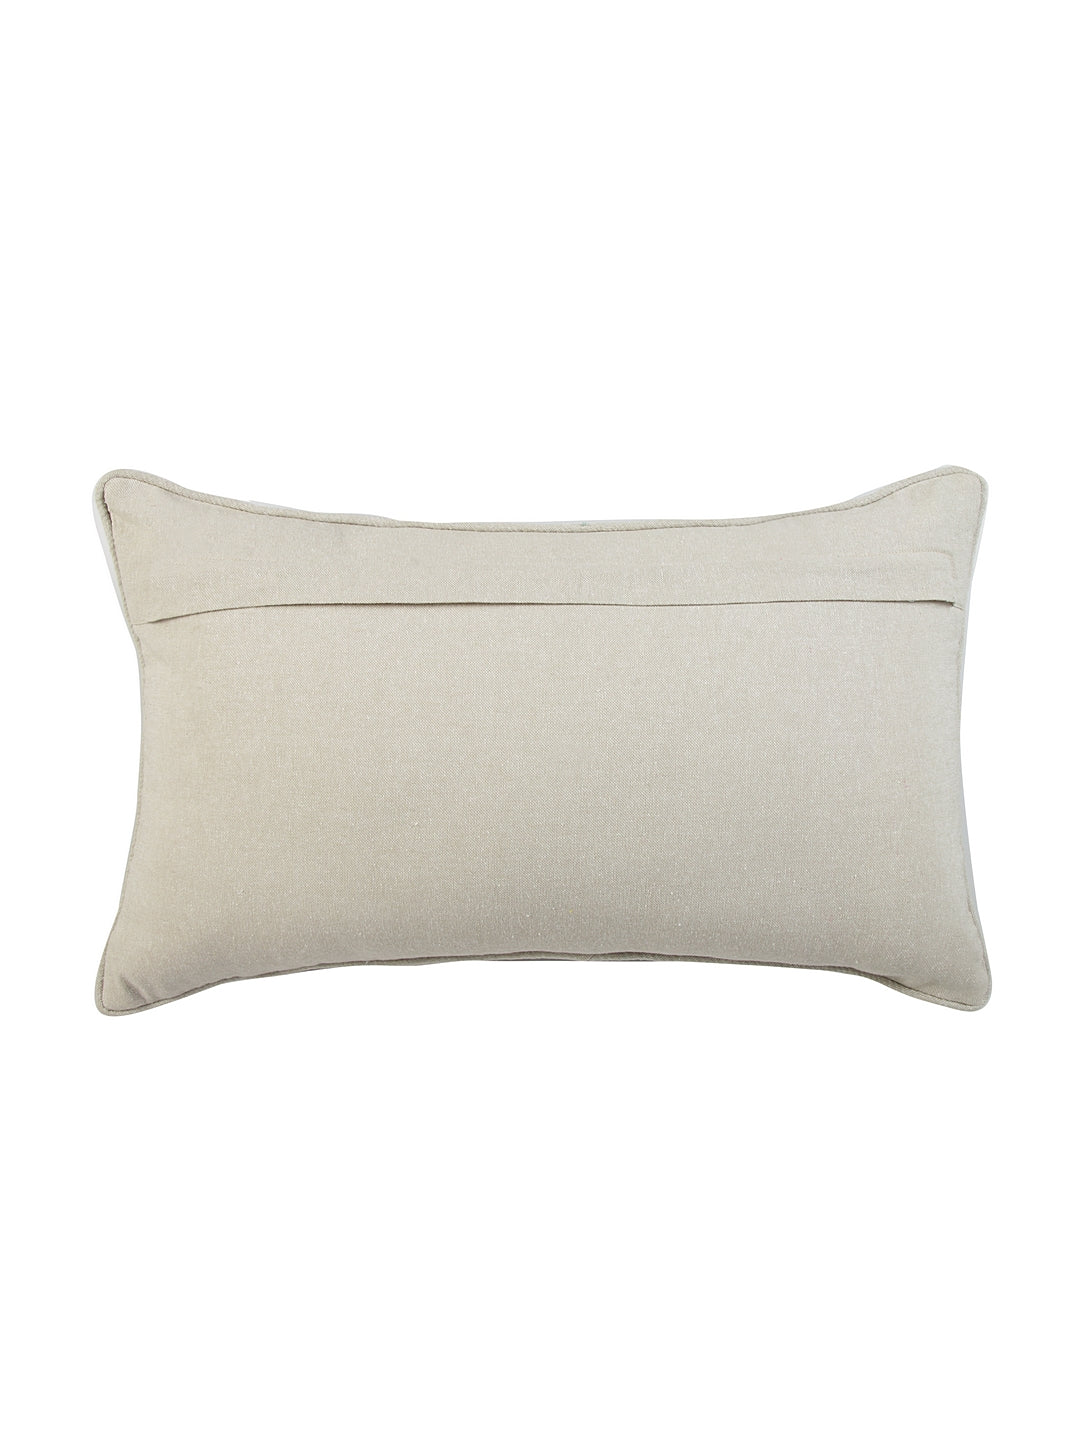 Blanc9 Meadow Pattern Cushion Cover with Filler 30x50cm